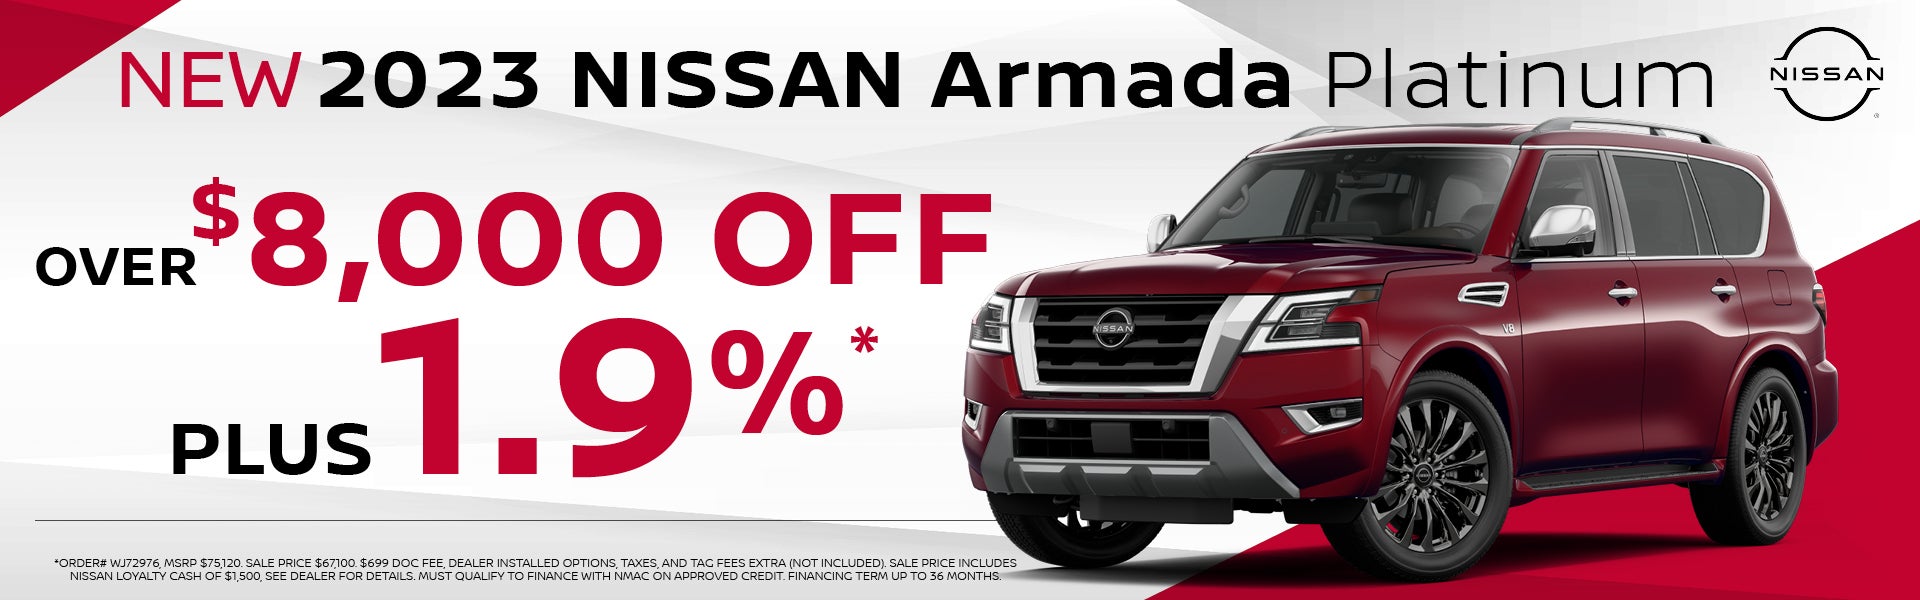 Search Friendship Nissan's Armada Inventory!